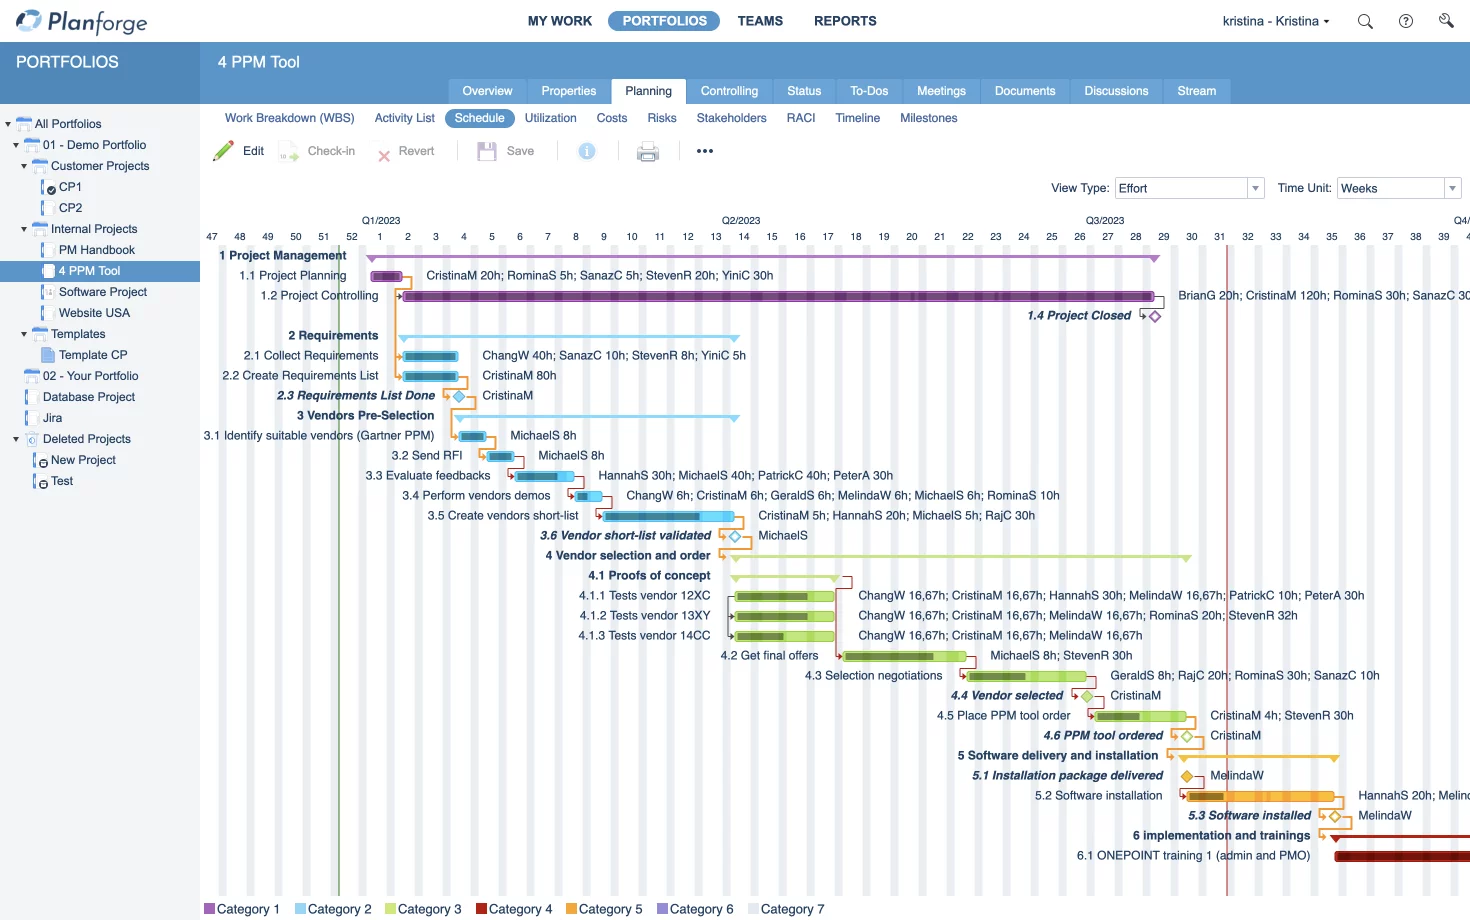 Project Management traditional Project Planning Gantt Chart Schedule Software by Planforge